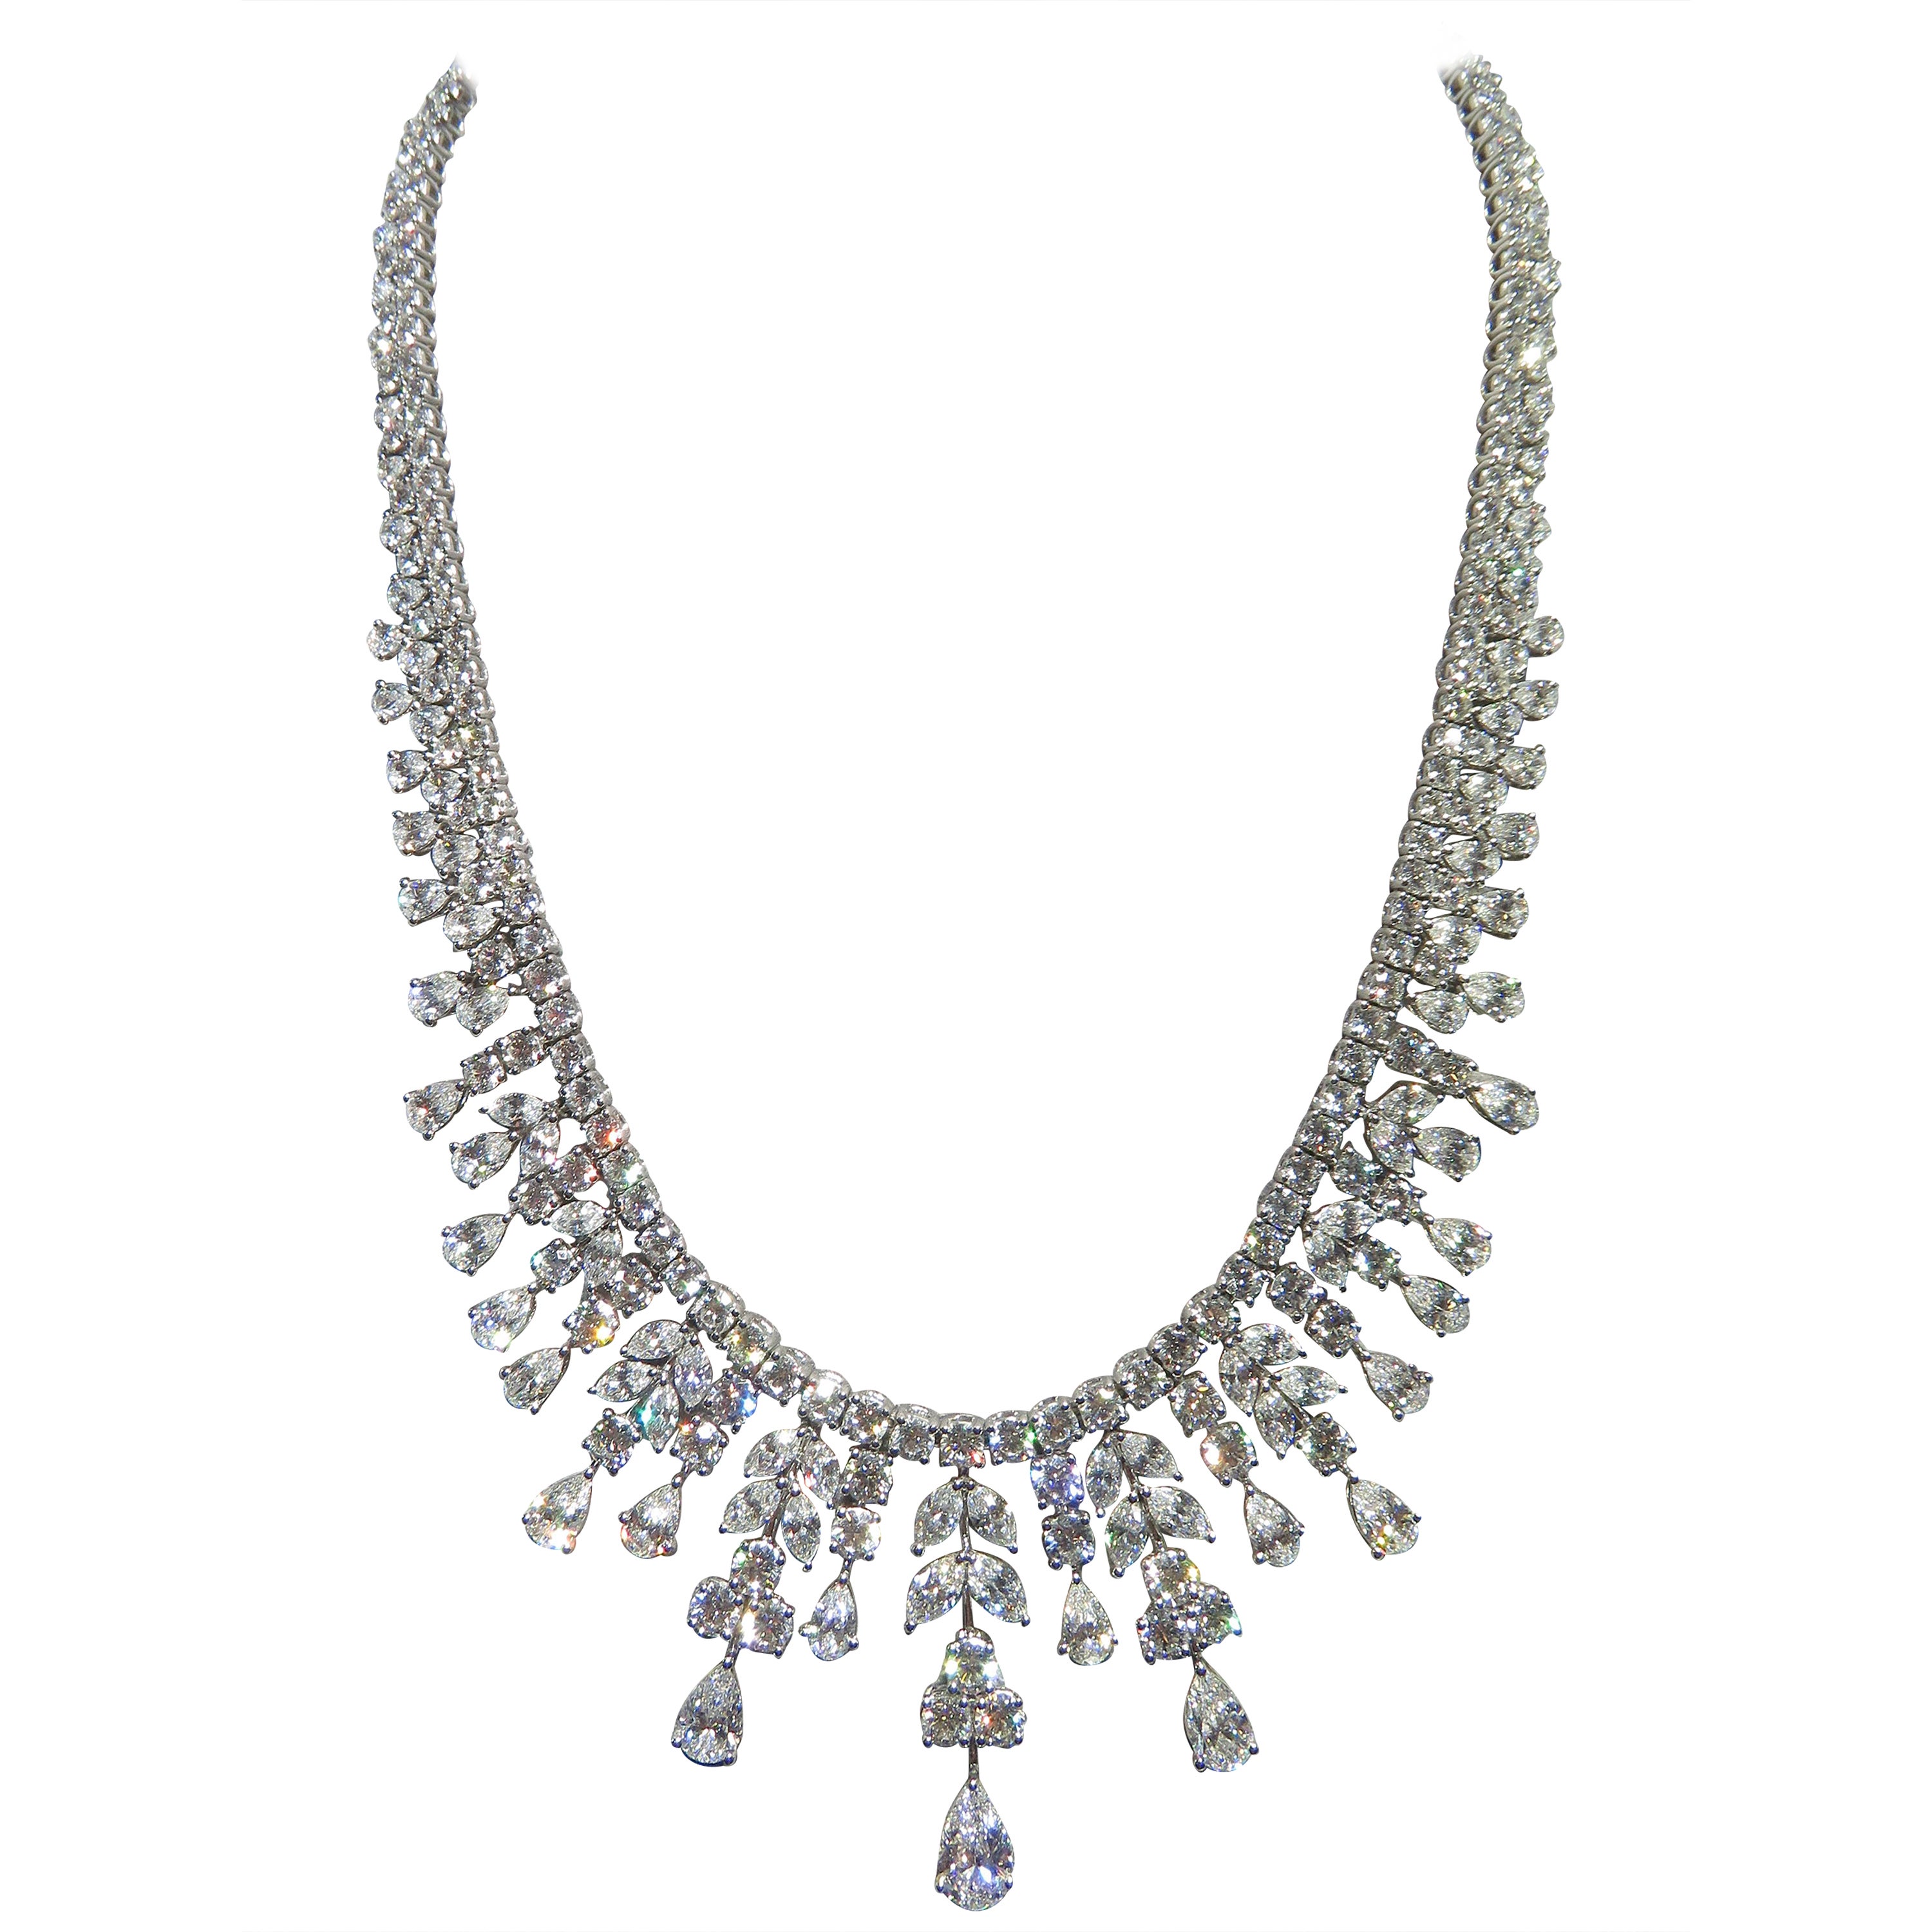 NWT $395, 000 Magnificent 44CT GAL Certified Winston Style Diamond Necklace For Sale